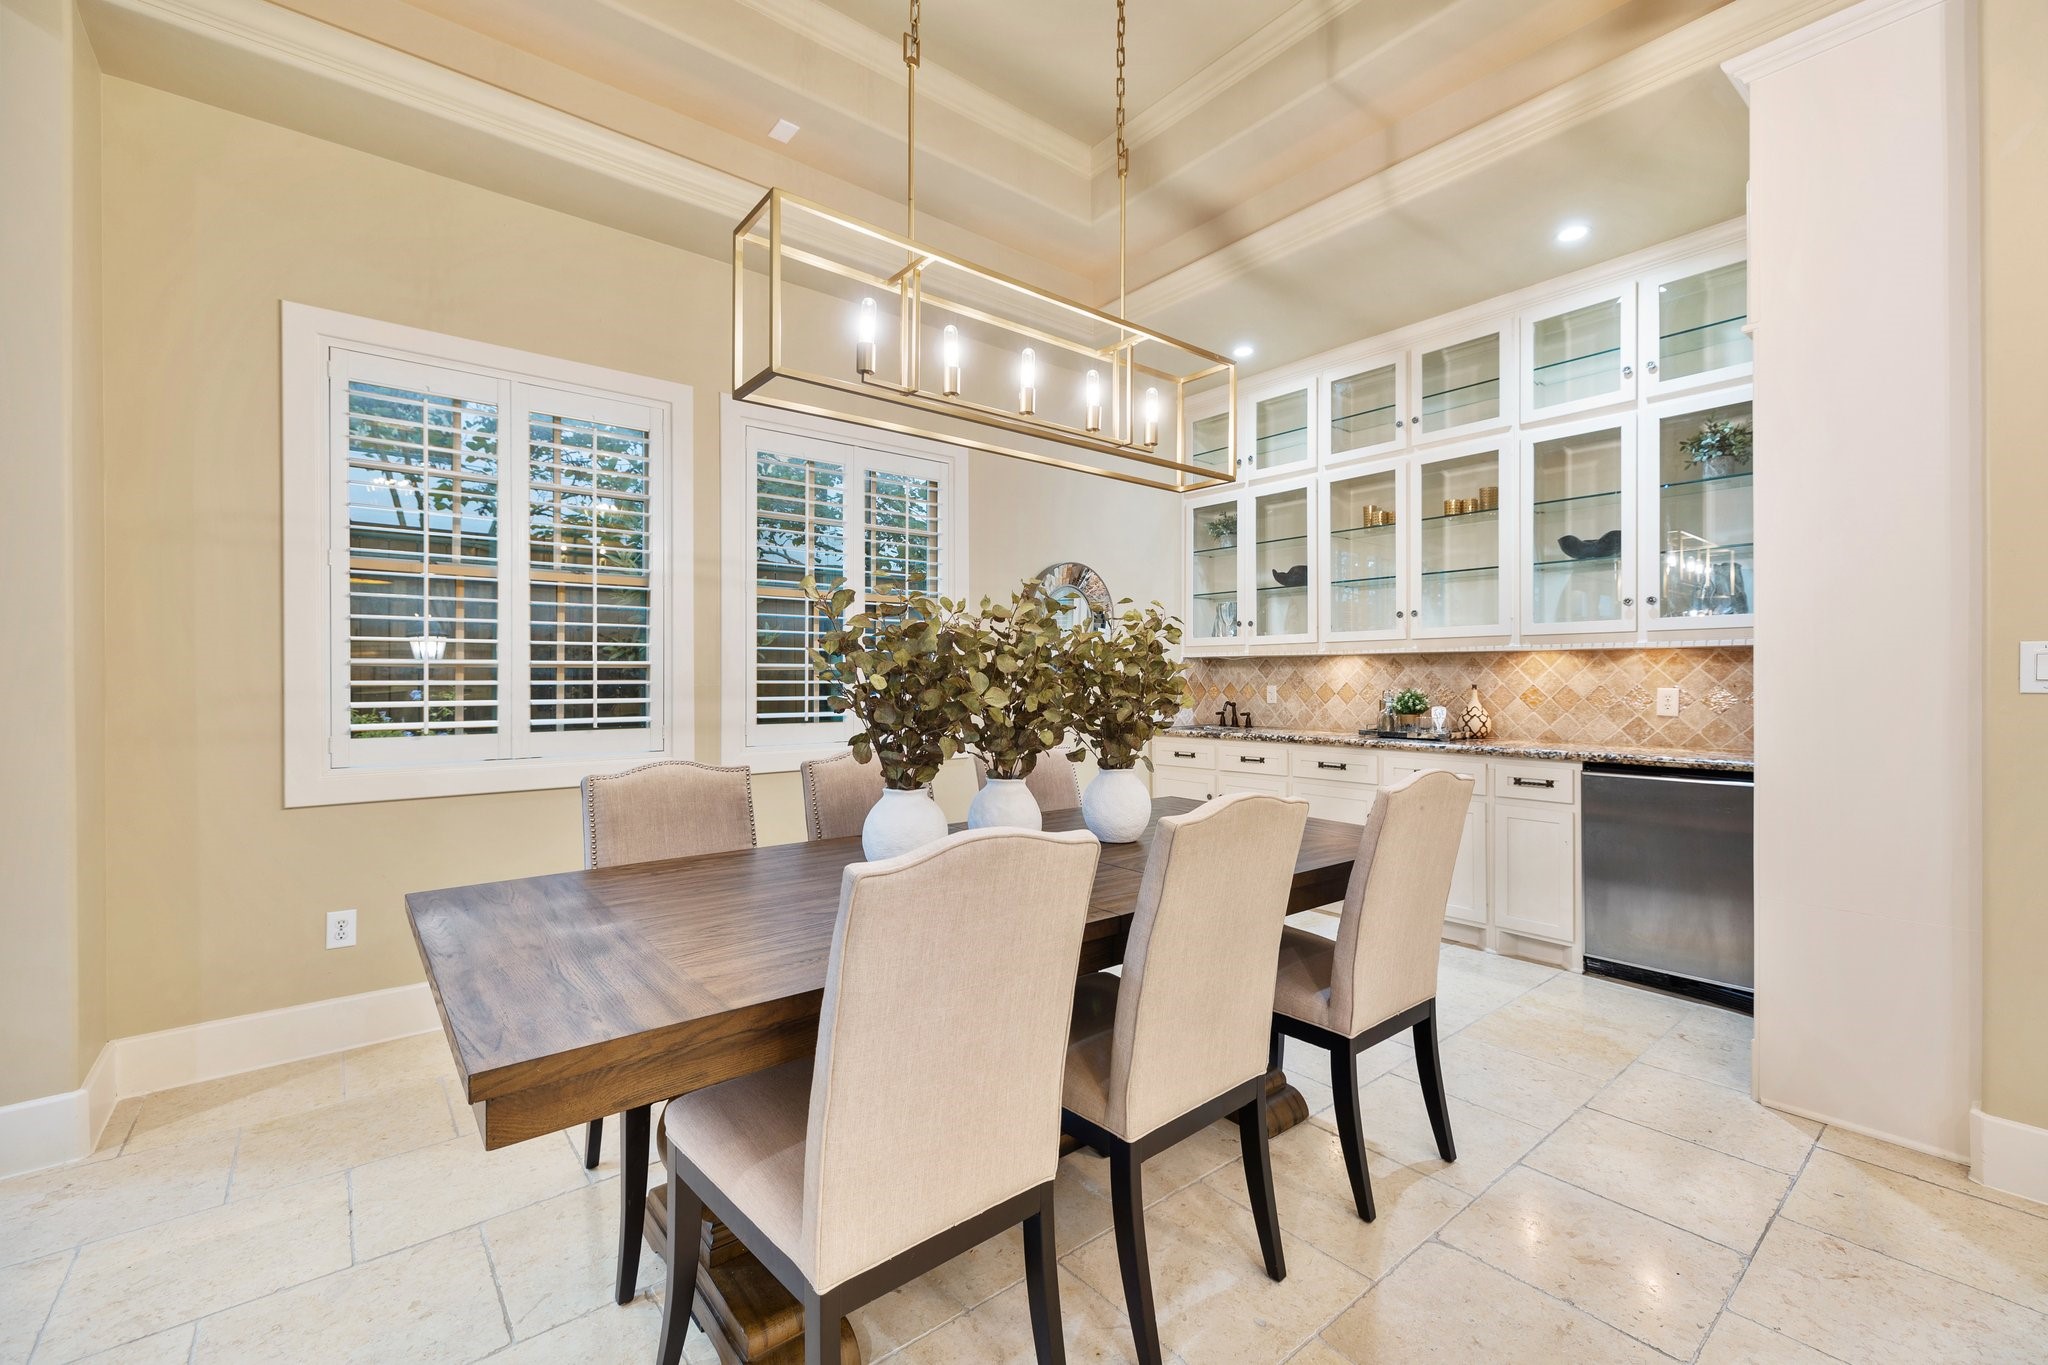 DINING - Dining room features tray ceiling with cove lighting, plantation shutters, and custom light fixture.